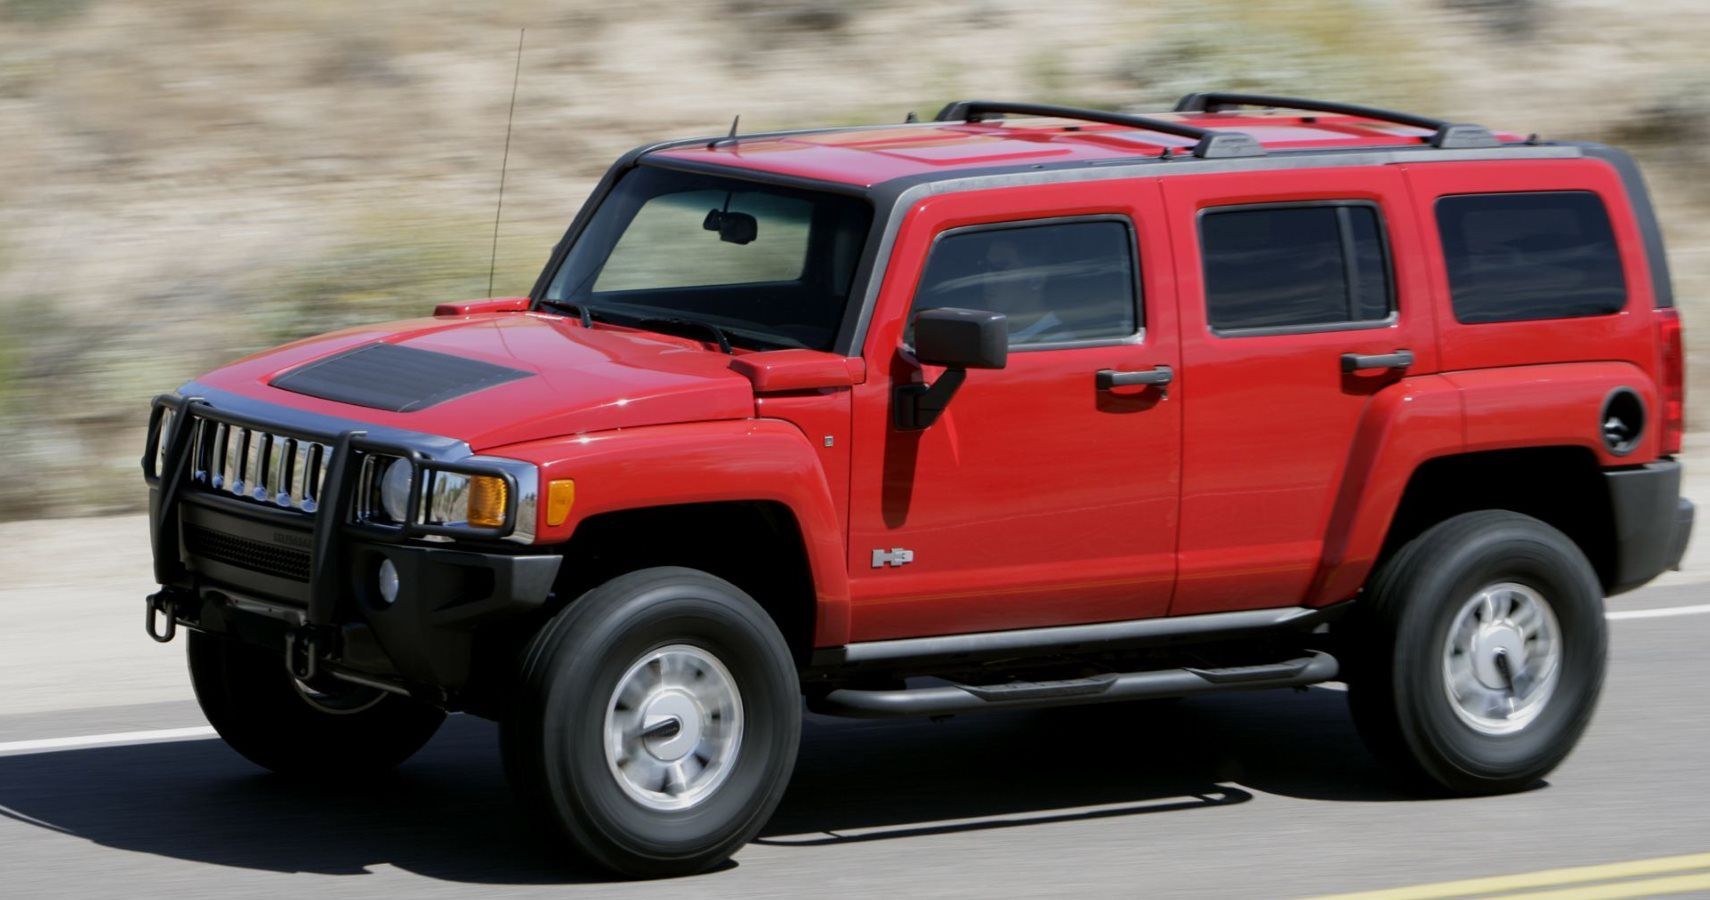 General Motors Toys With Our Emotions By Considering An Electric Hummer1710 x 900